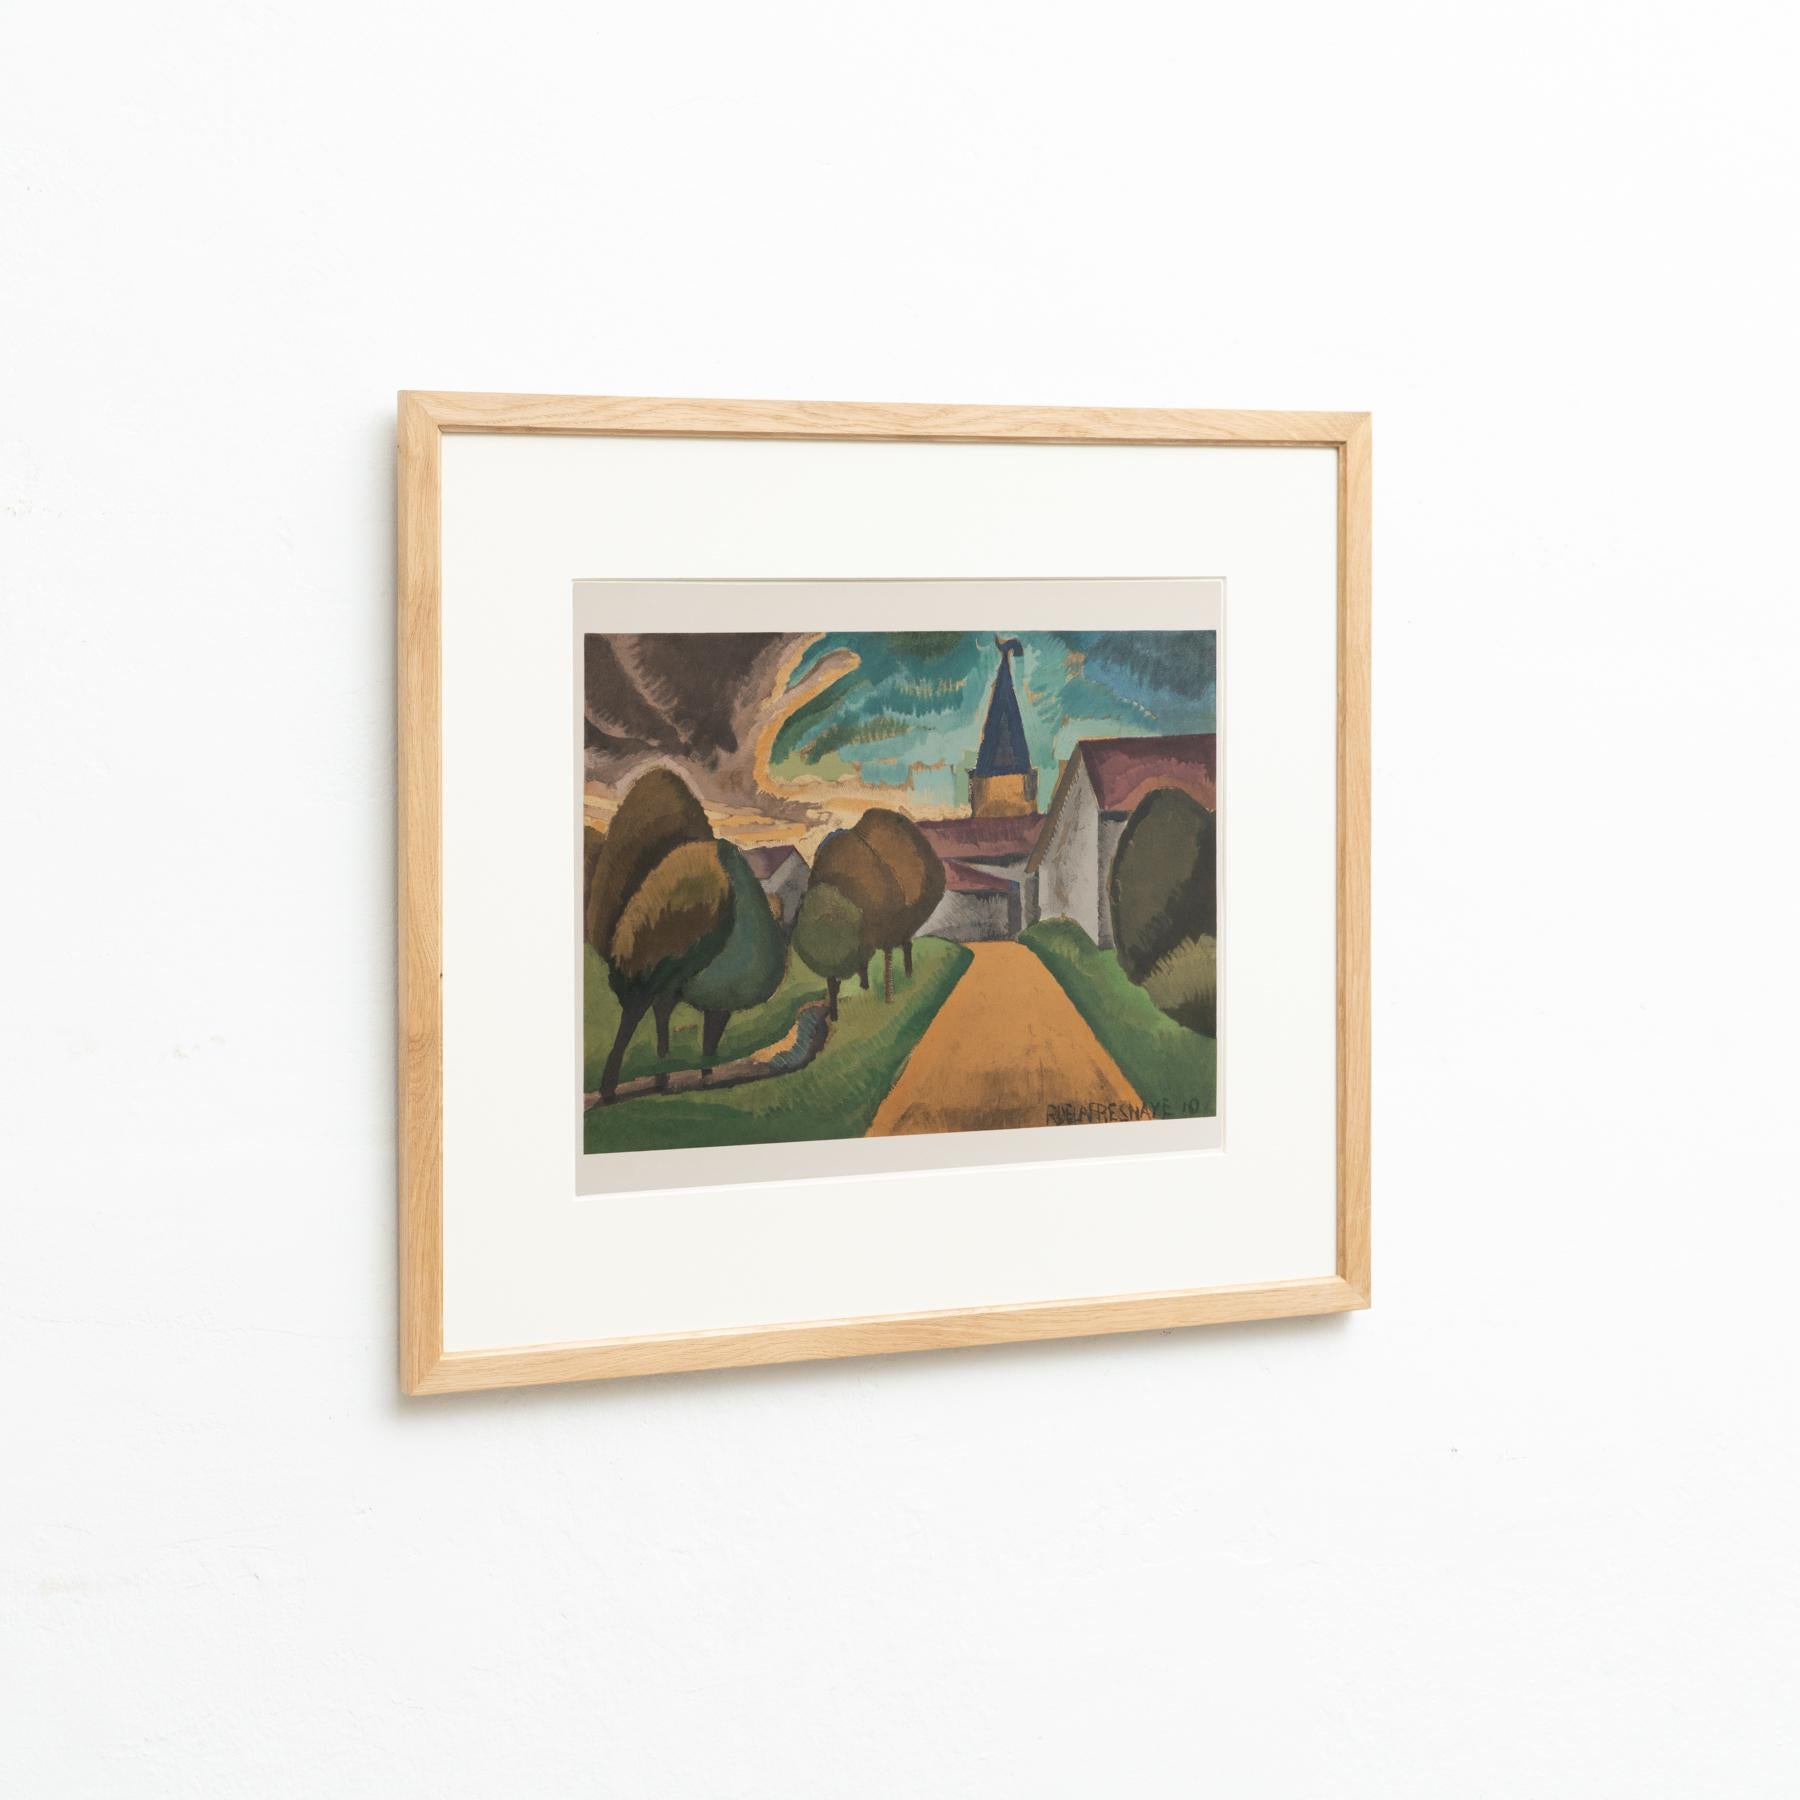 Original color lithograph 'L'entree du village' by Roger de la Fresnaye.

Lithograph printed from an original painting made by the author in France, circa 1910.

Published in France by Fernand Mourlot, circa 1968. 

Framed and signed in the